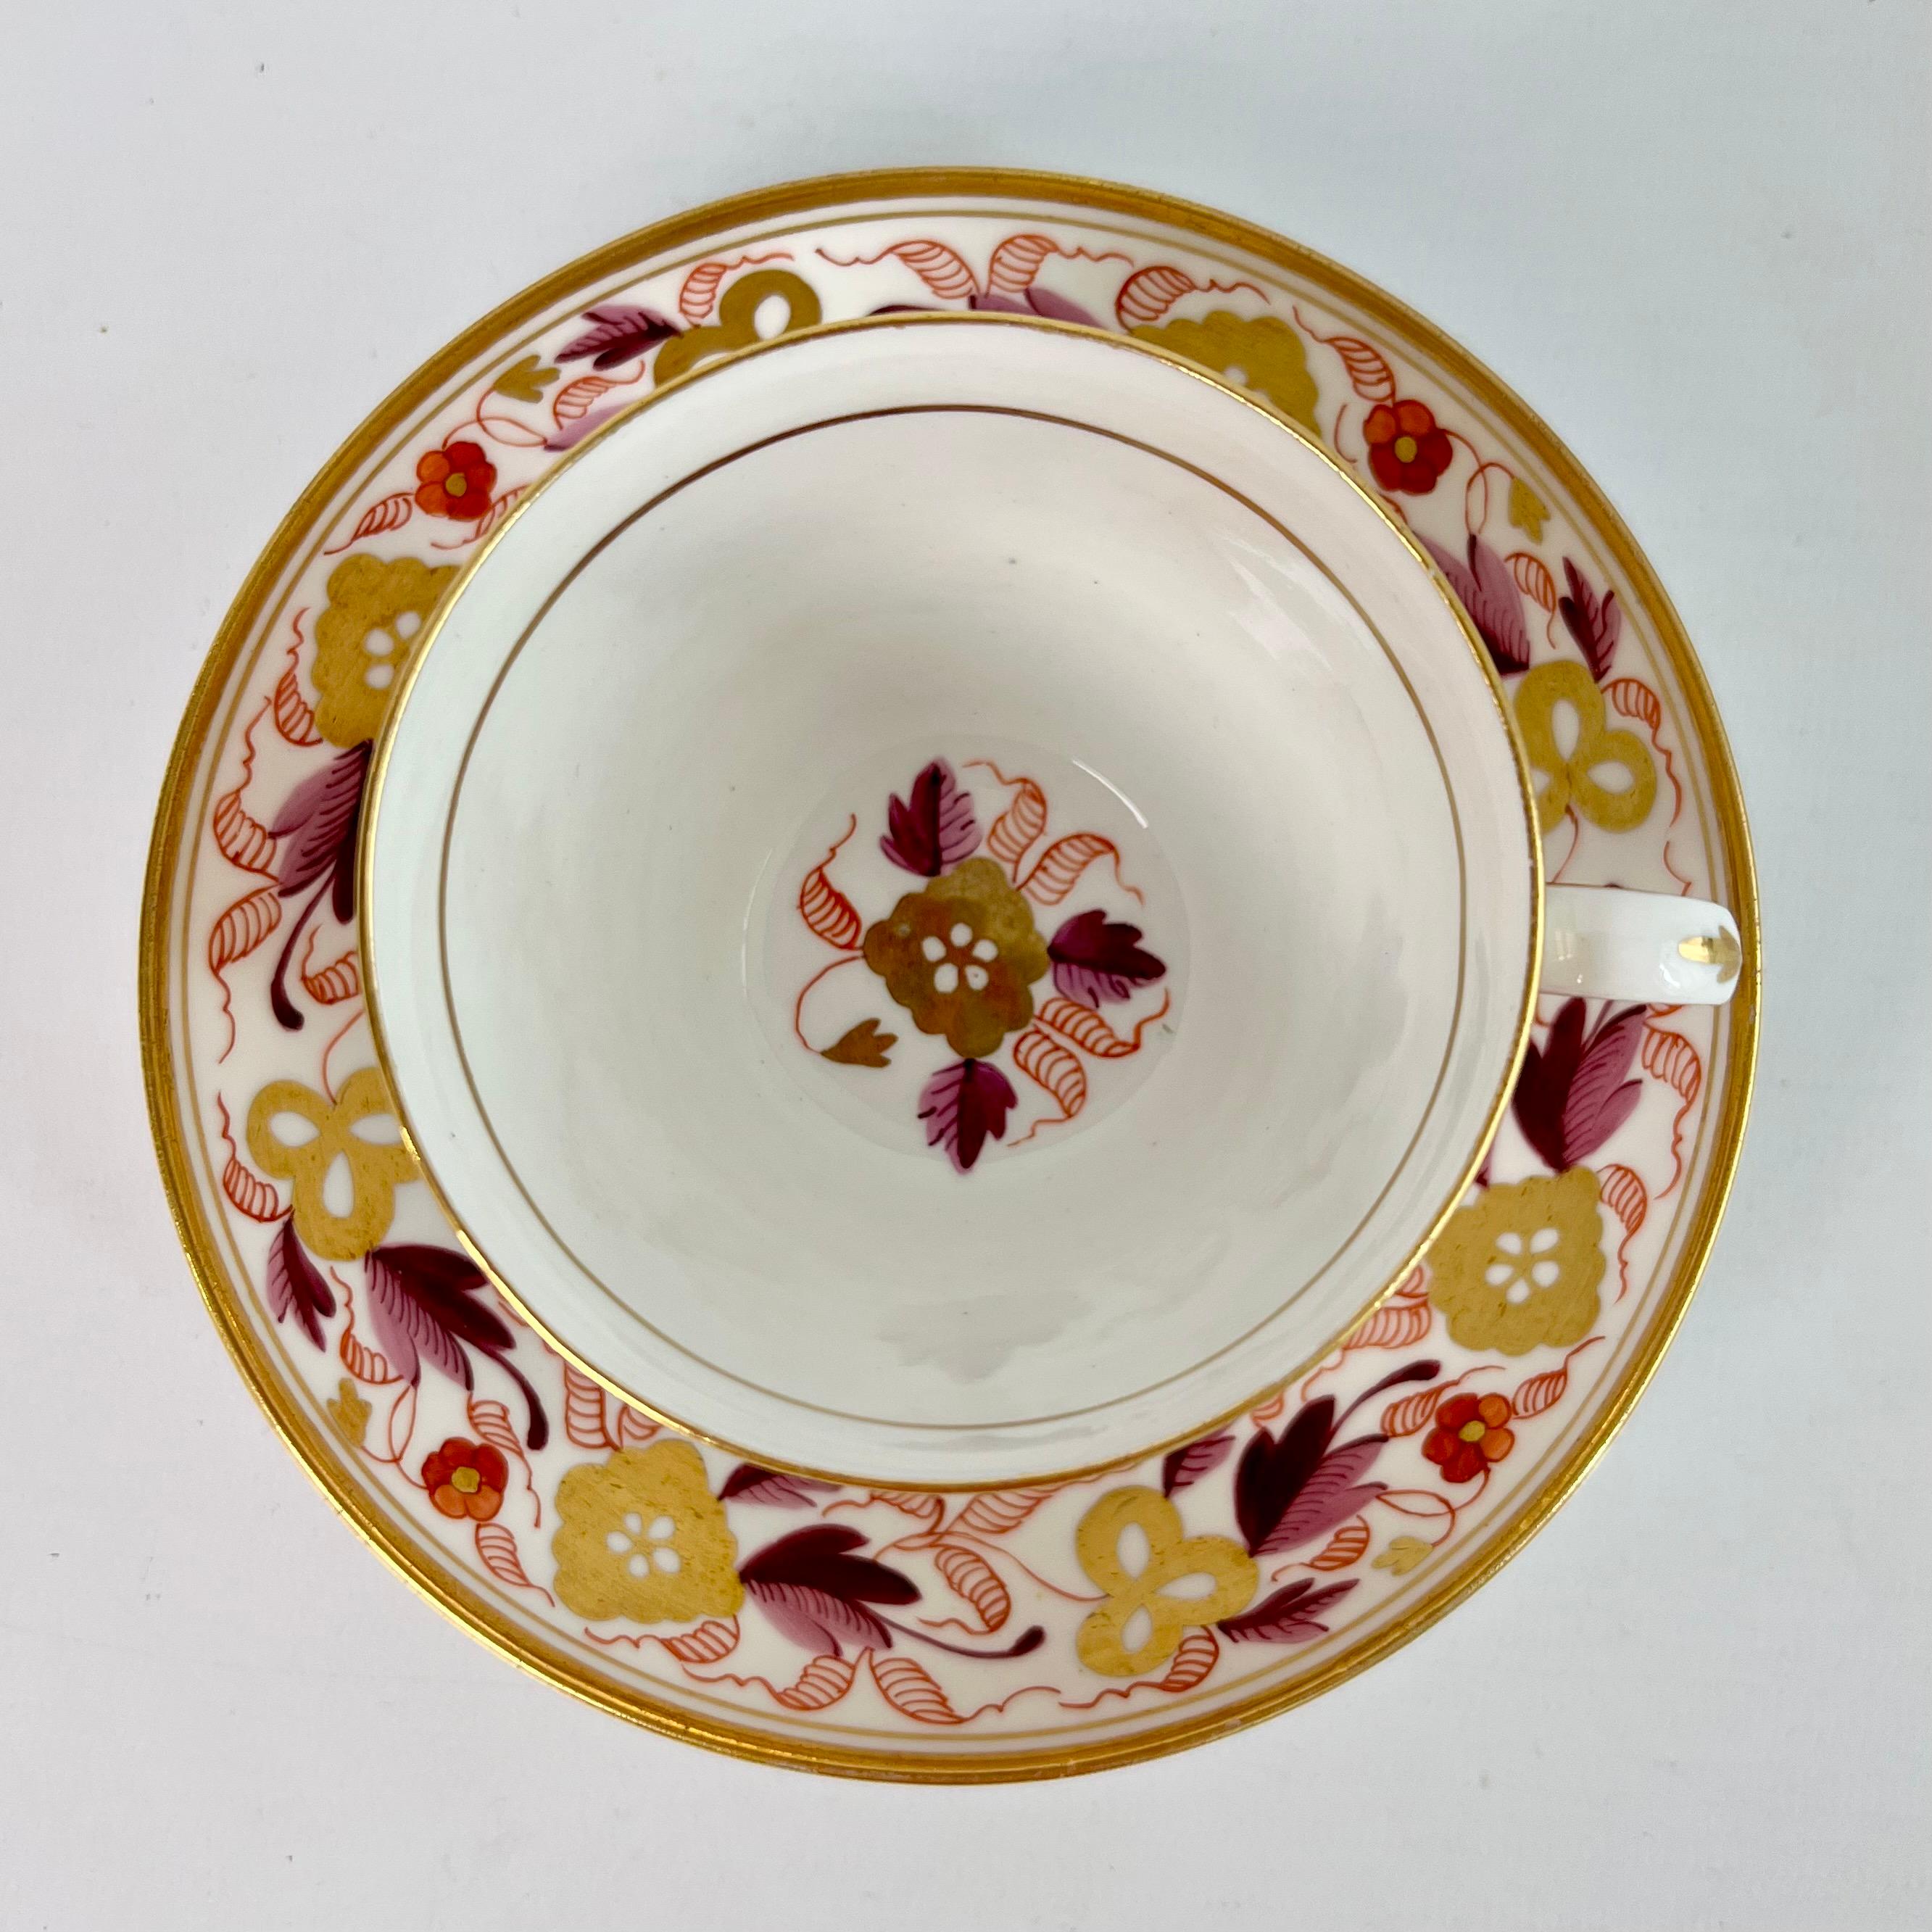 Spode Porcelain Teacup Trio, Puce and Gilt Floral Pattern, Neoclassical ca 1810 1